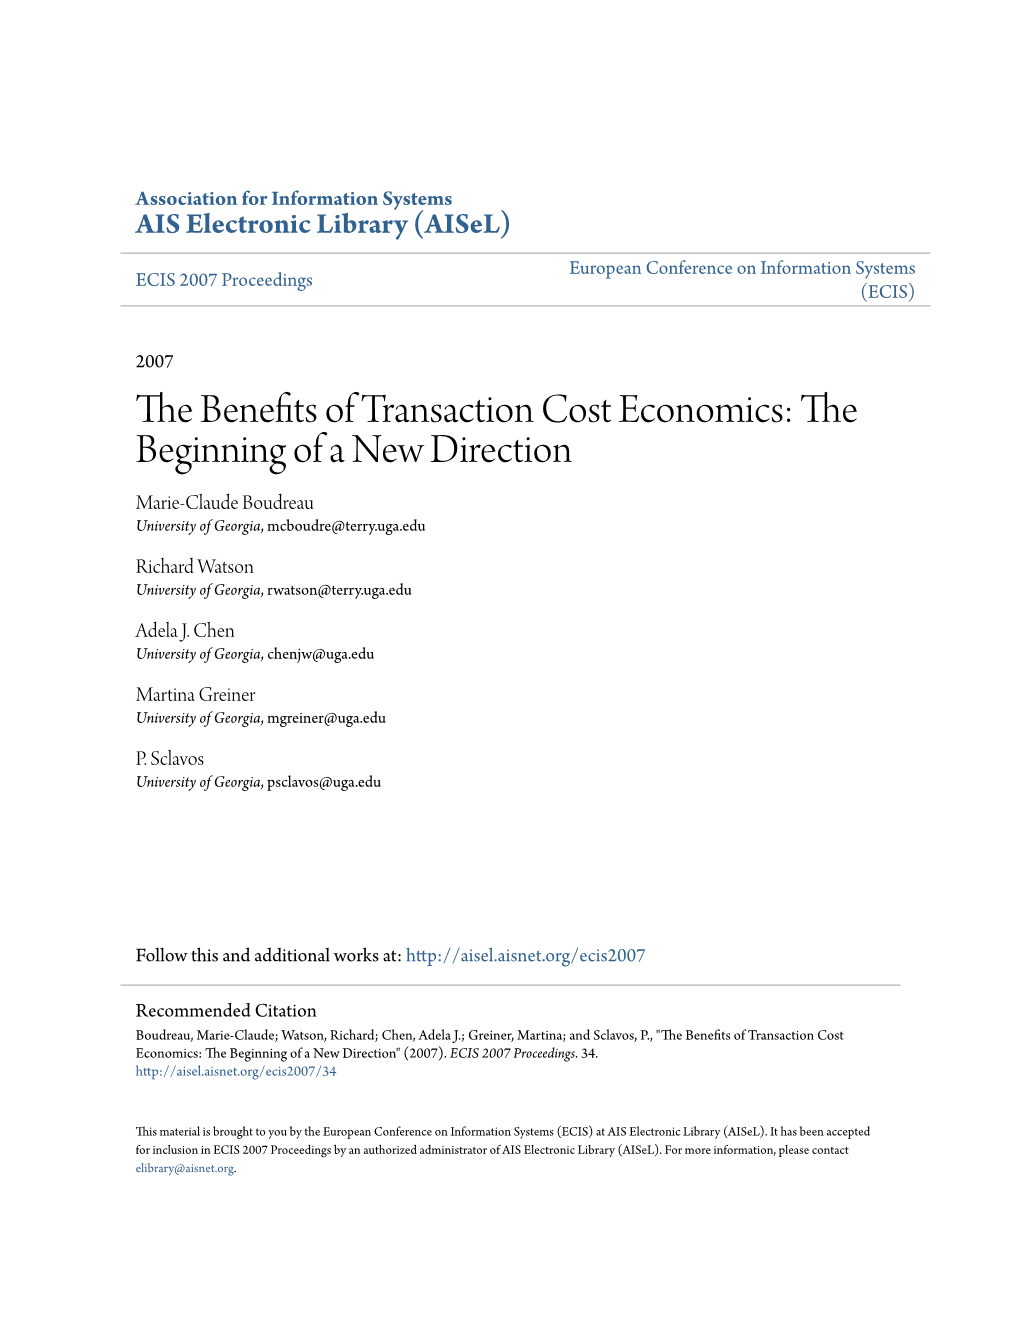 The Benefits of Transaction Cost Economics: the Beginning of a New Direction Marie-Claude Boudreau University of Georgia, Mcboudre@Terry.Uga.Edu